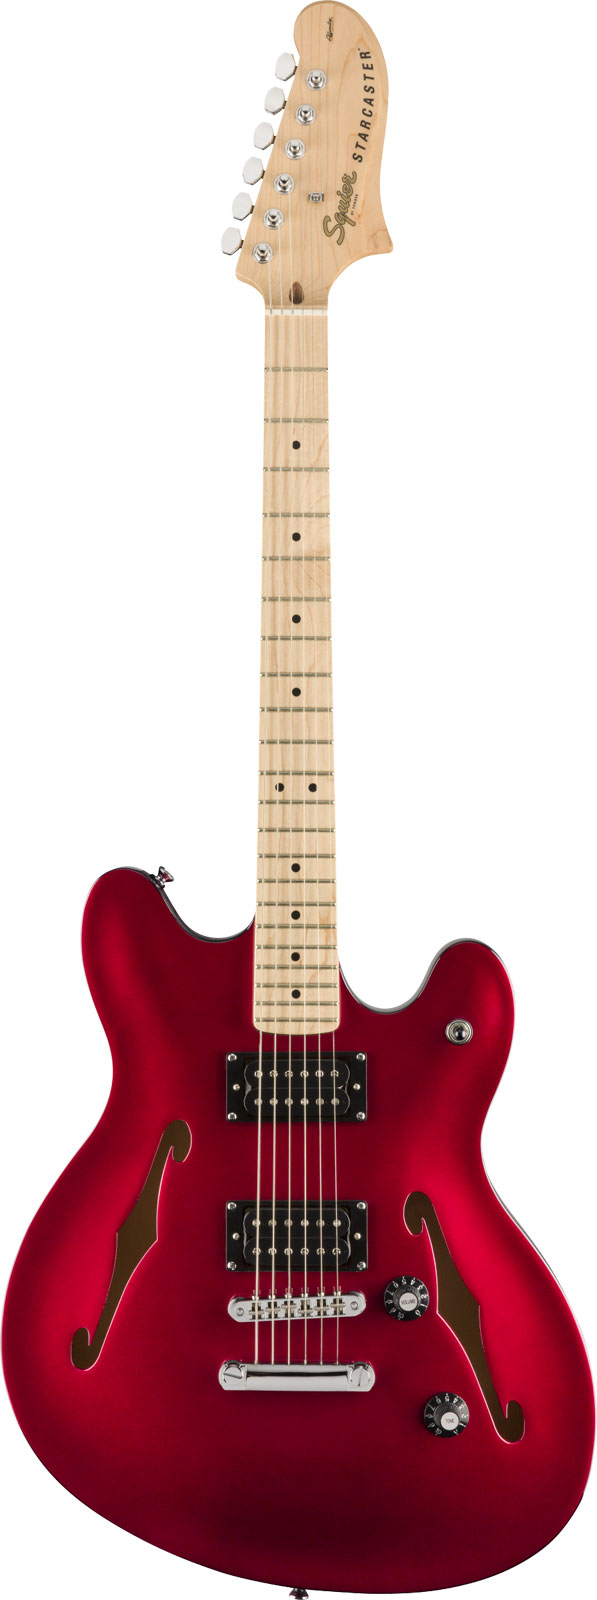 SQUIER STARCASTER AFFINITY MN CANDY APPLE RED